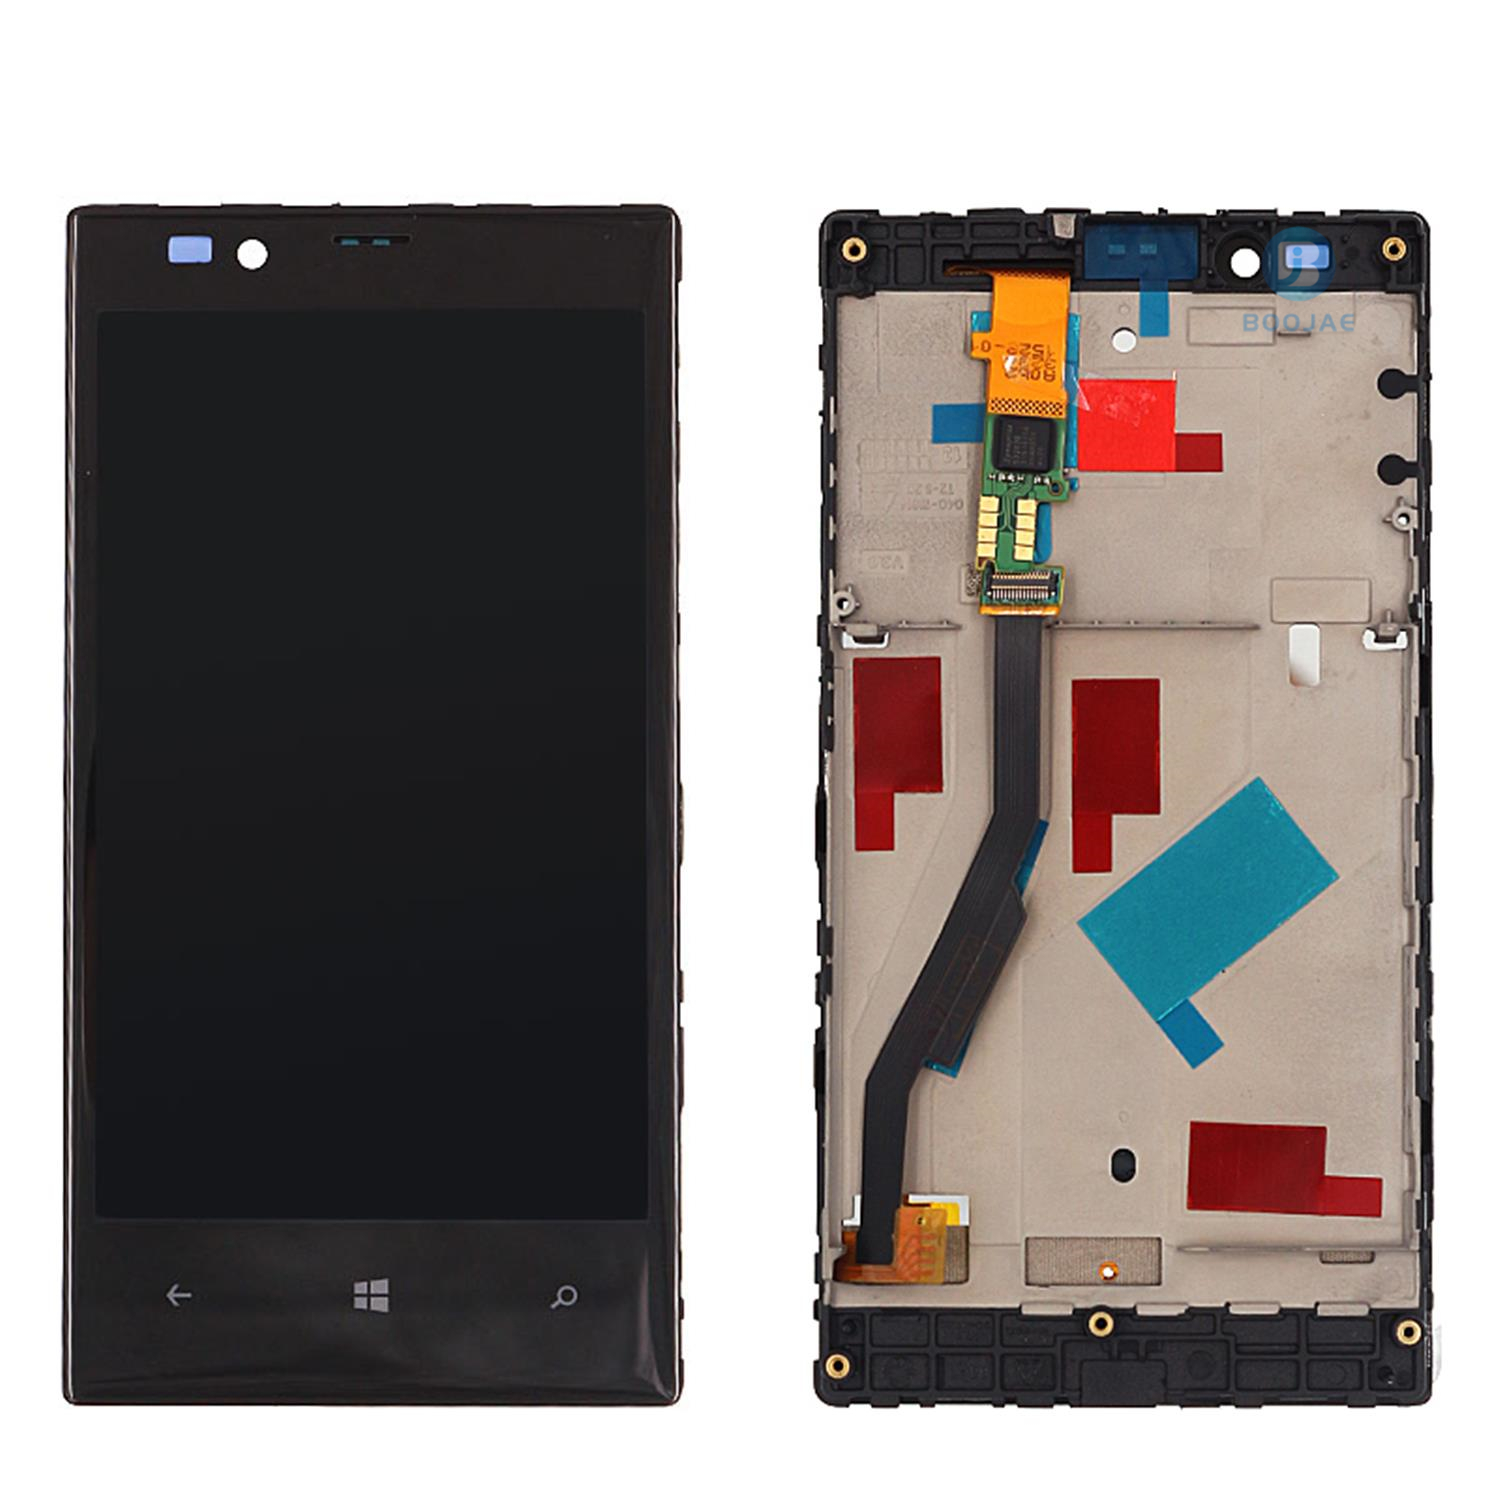 For Nokia Lumia 720 LCD Screen Display and Touch Panel Digitizer Assembly Replacement